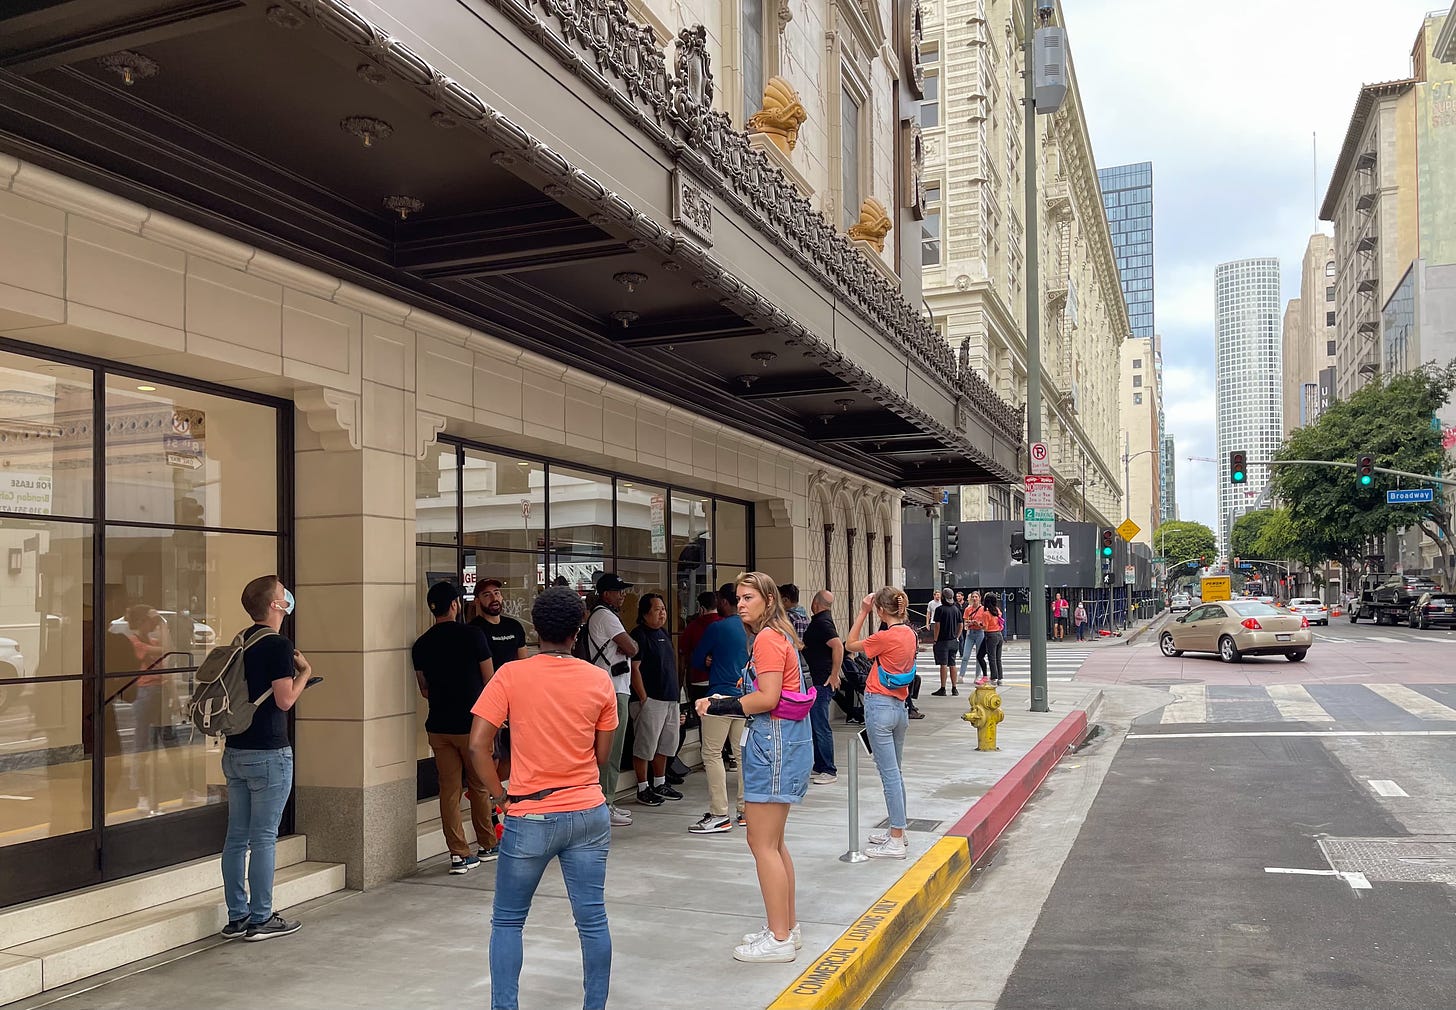 The line at Apple Tower Theatre 90 minutes before opening. Customers are lined up halfway around the perimeter of the store.